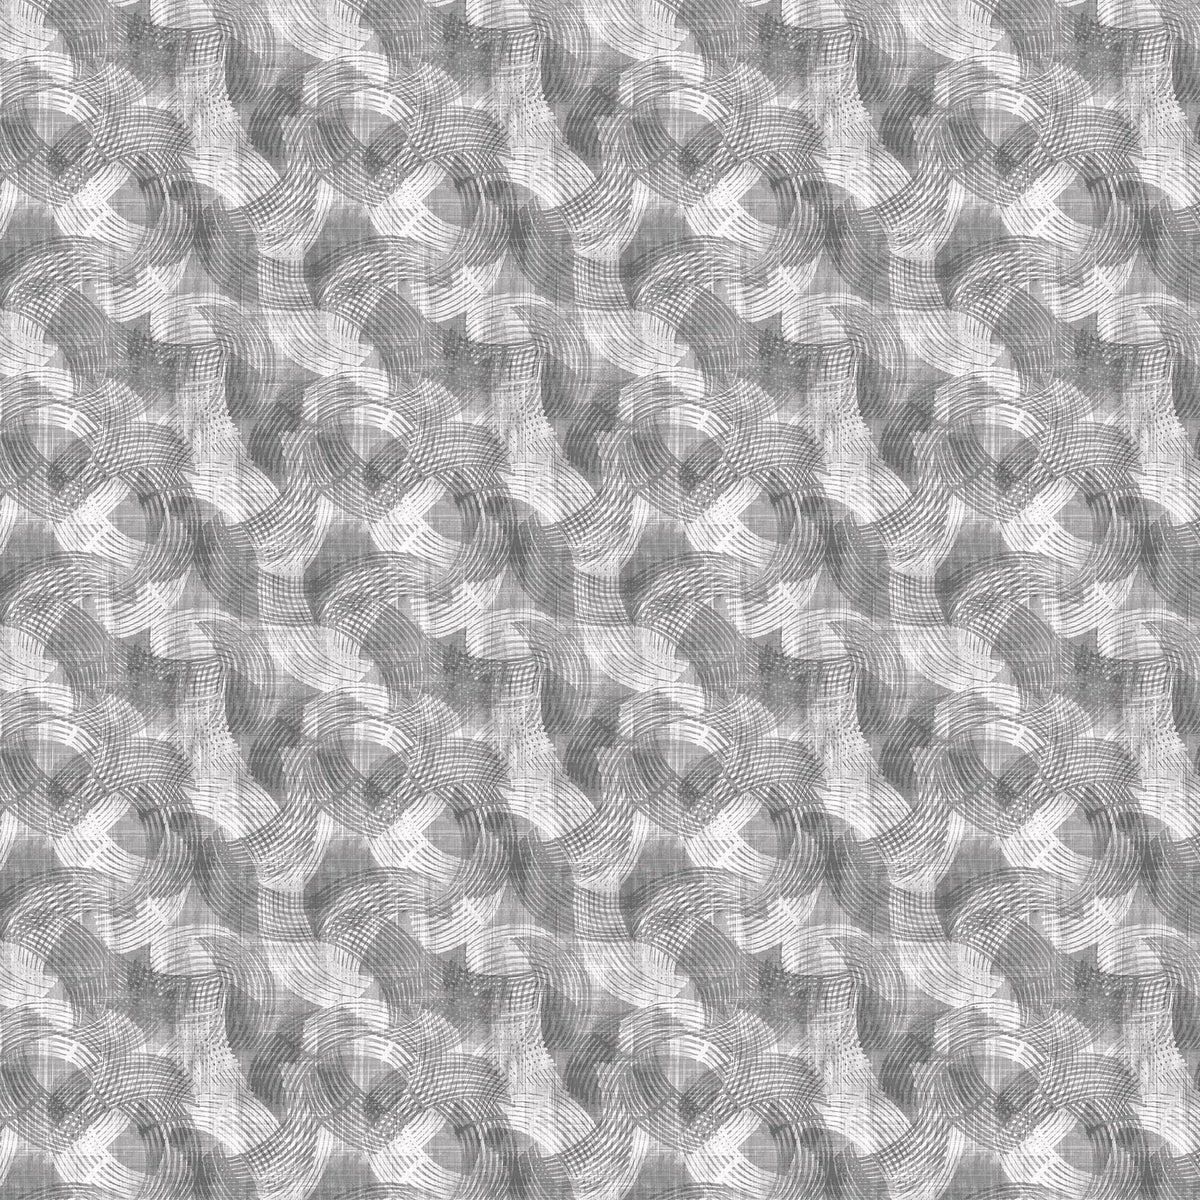 108" Crescent Quilt Backing Fabric - Textured Arcs in Light Gray - 2970-88